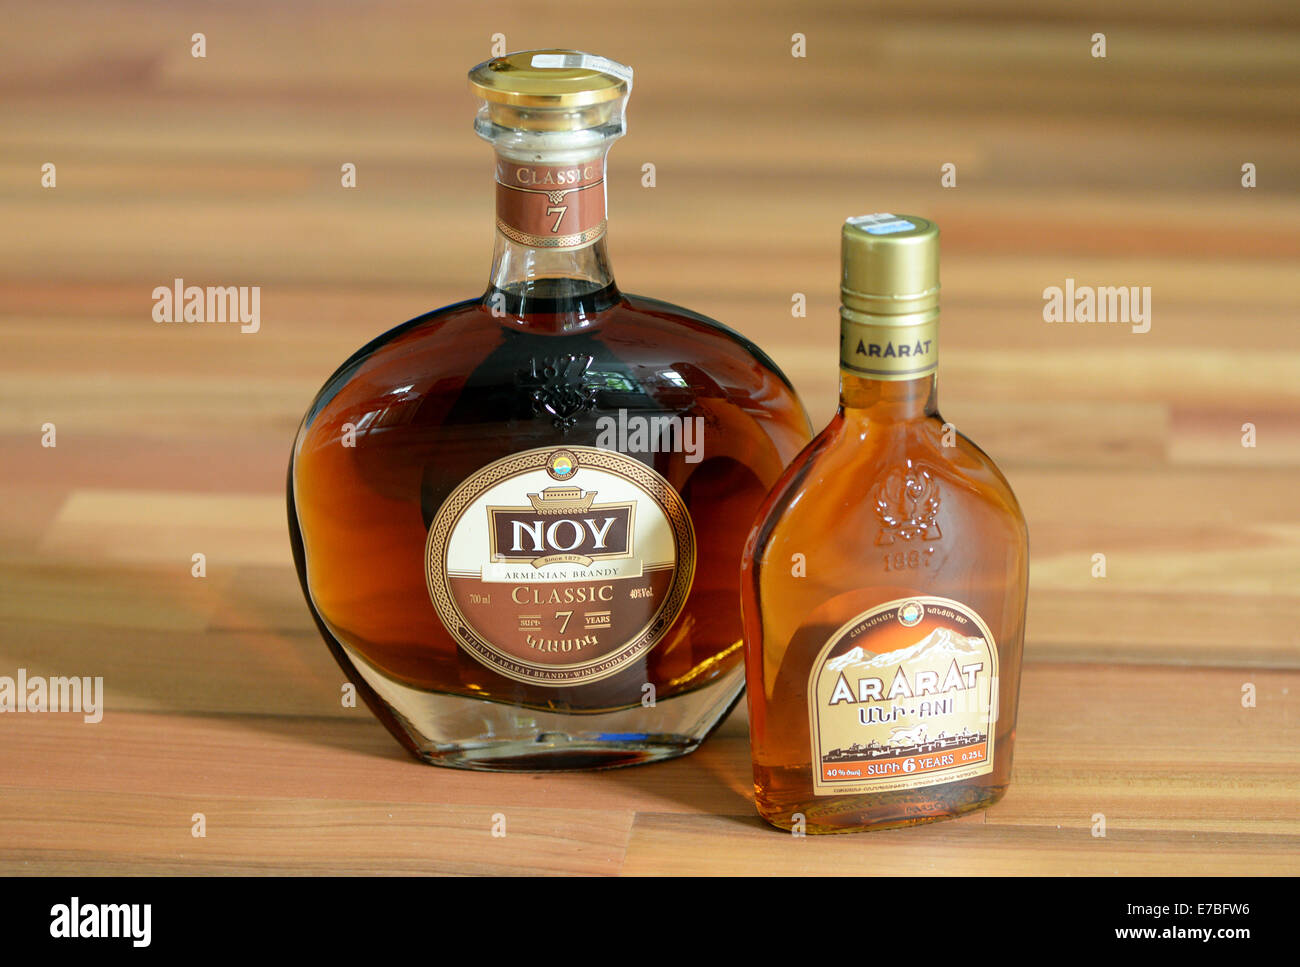 Armenian brandy of the brands Noy and Ararat in Yerevan, Armenia, 30 June 2014. Wine and brandy production have a long tradition in Armenia. Photo: Jens Kalaene -NO WIRE SERVICE- Stock Photo